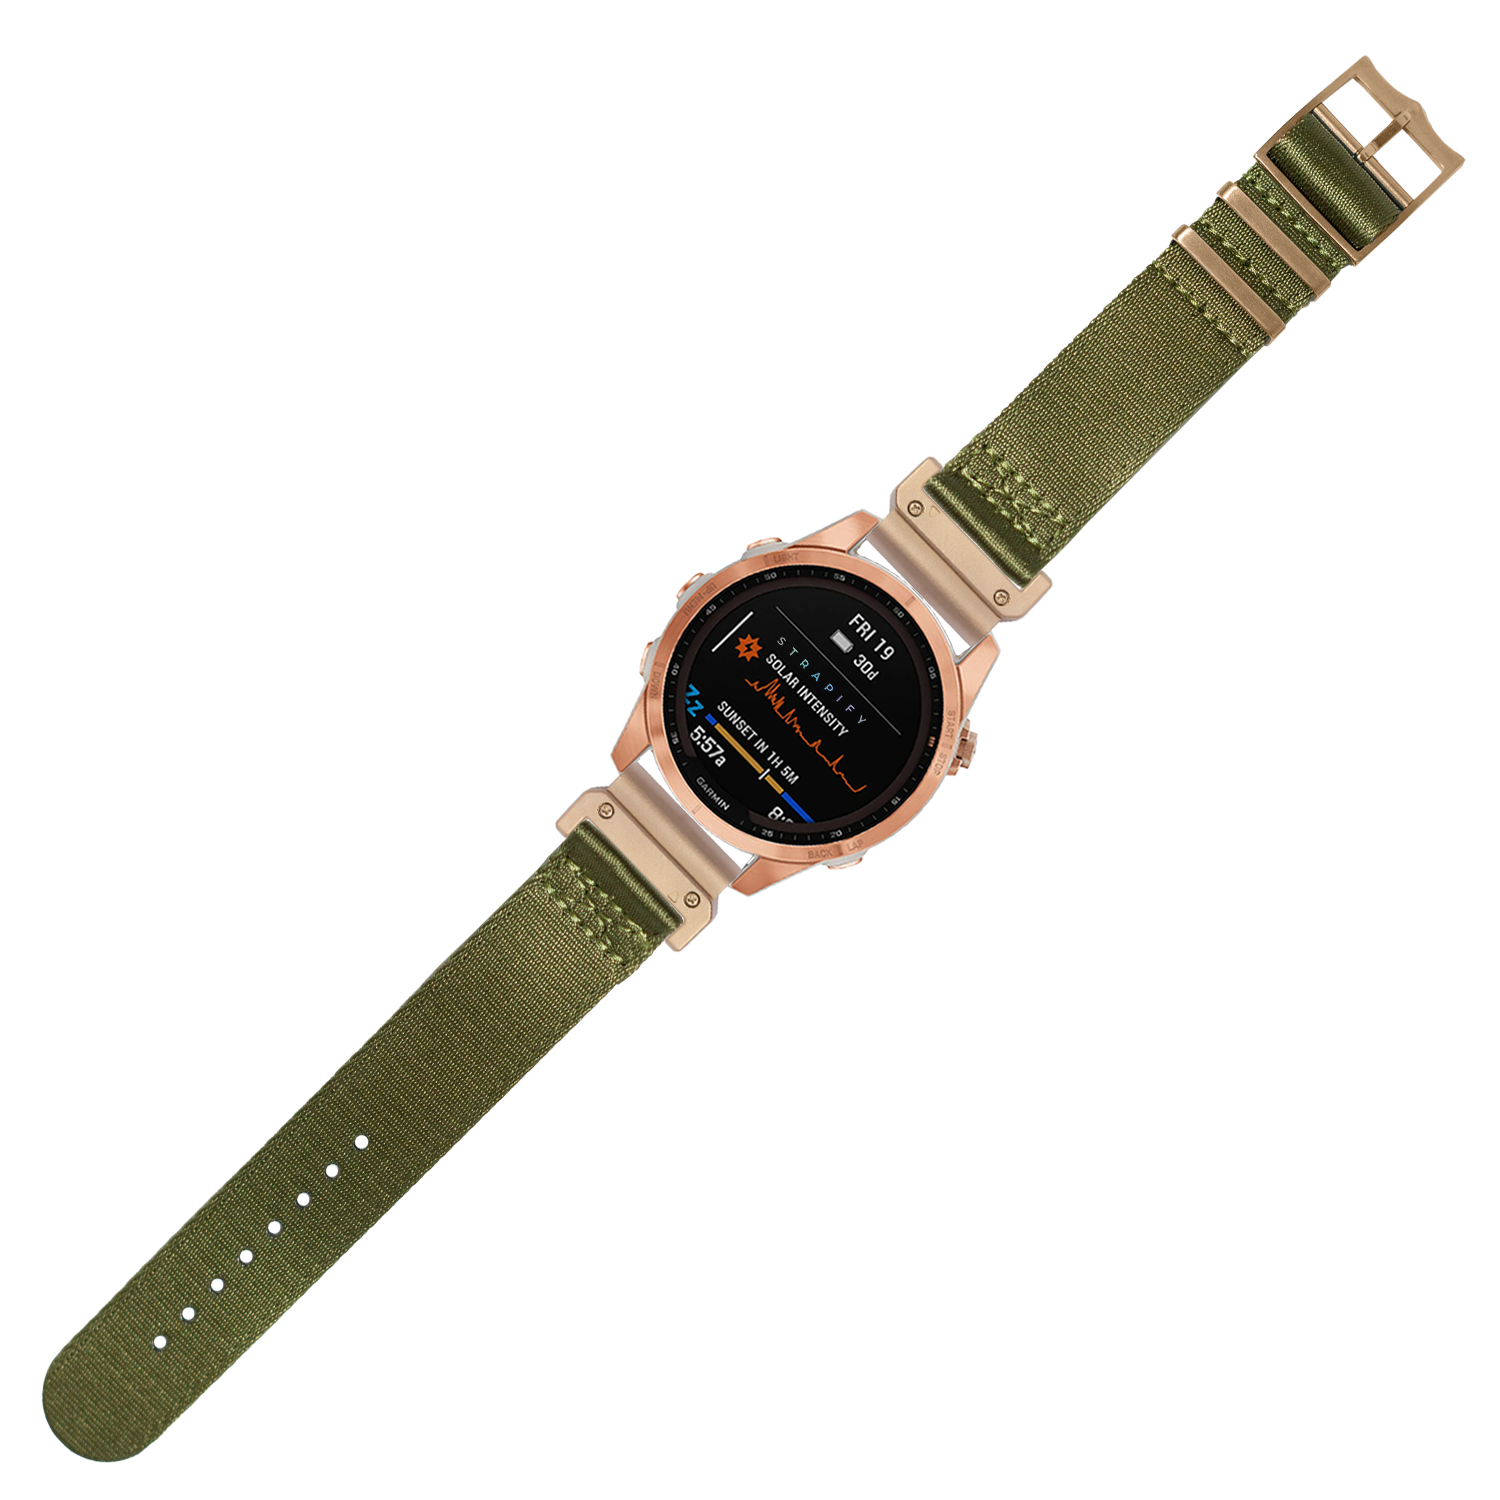 [QuickFit] Ultra Militex - Army Green [Rose Gold Hardware] 22mm